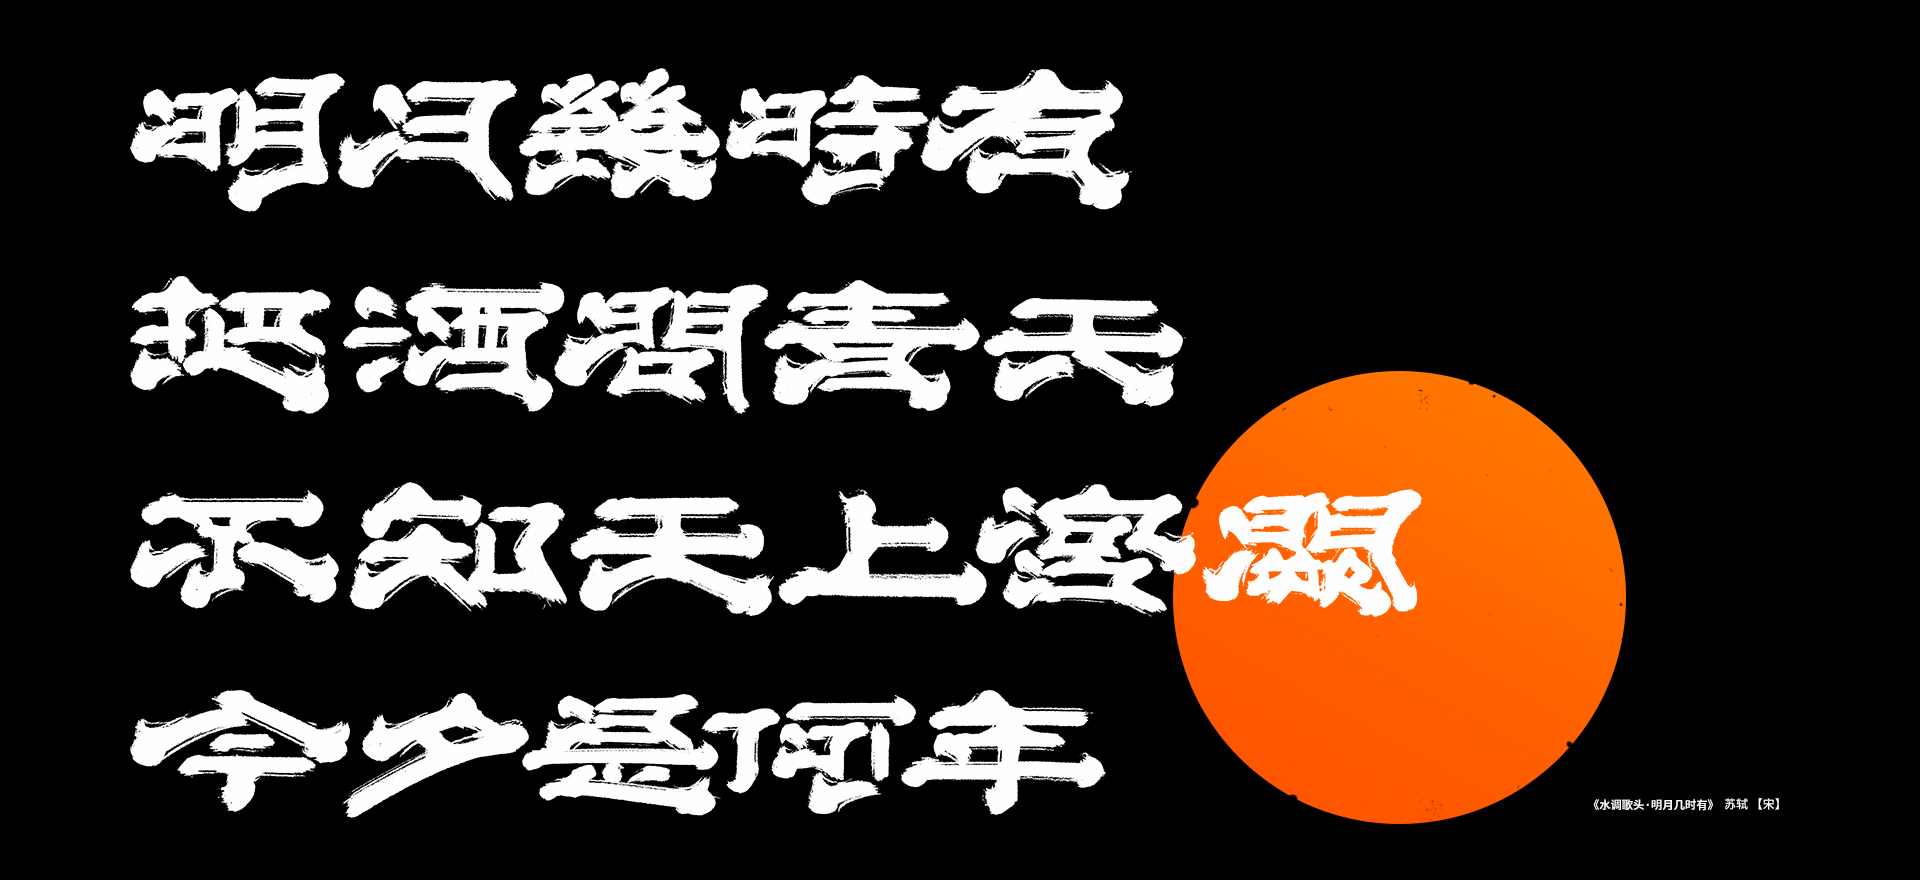 10P Collection of the latest Chinese font design schemes in 2021 #.616